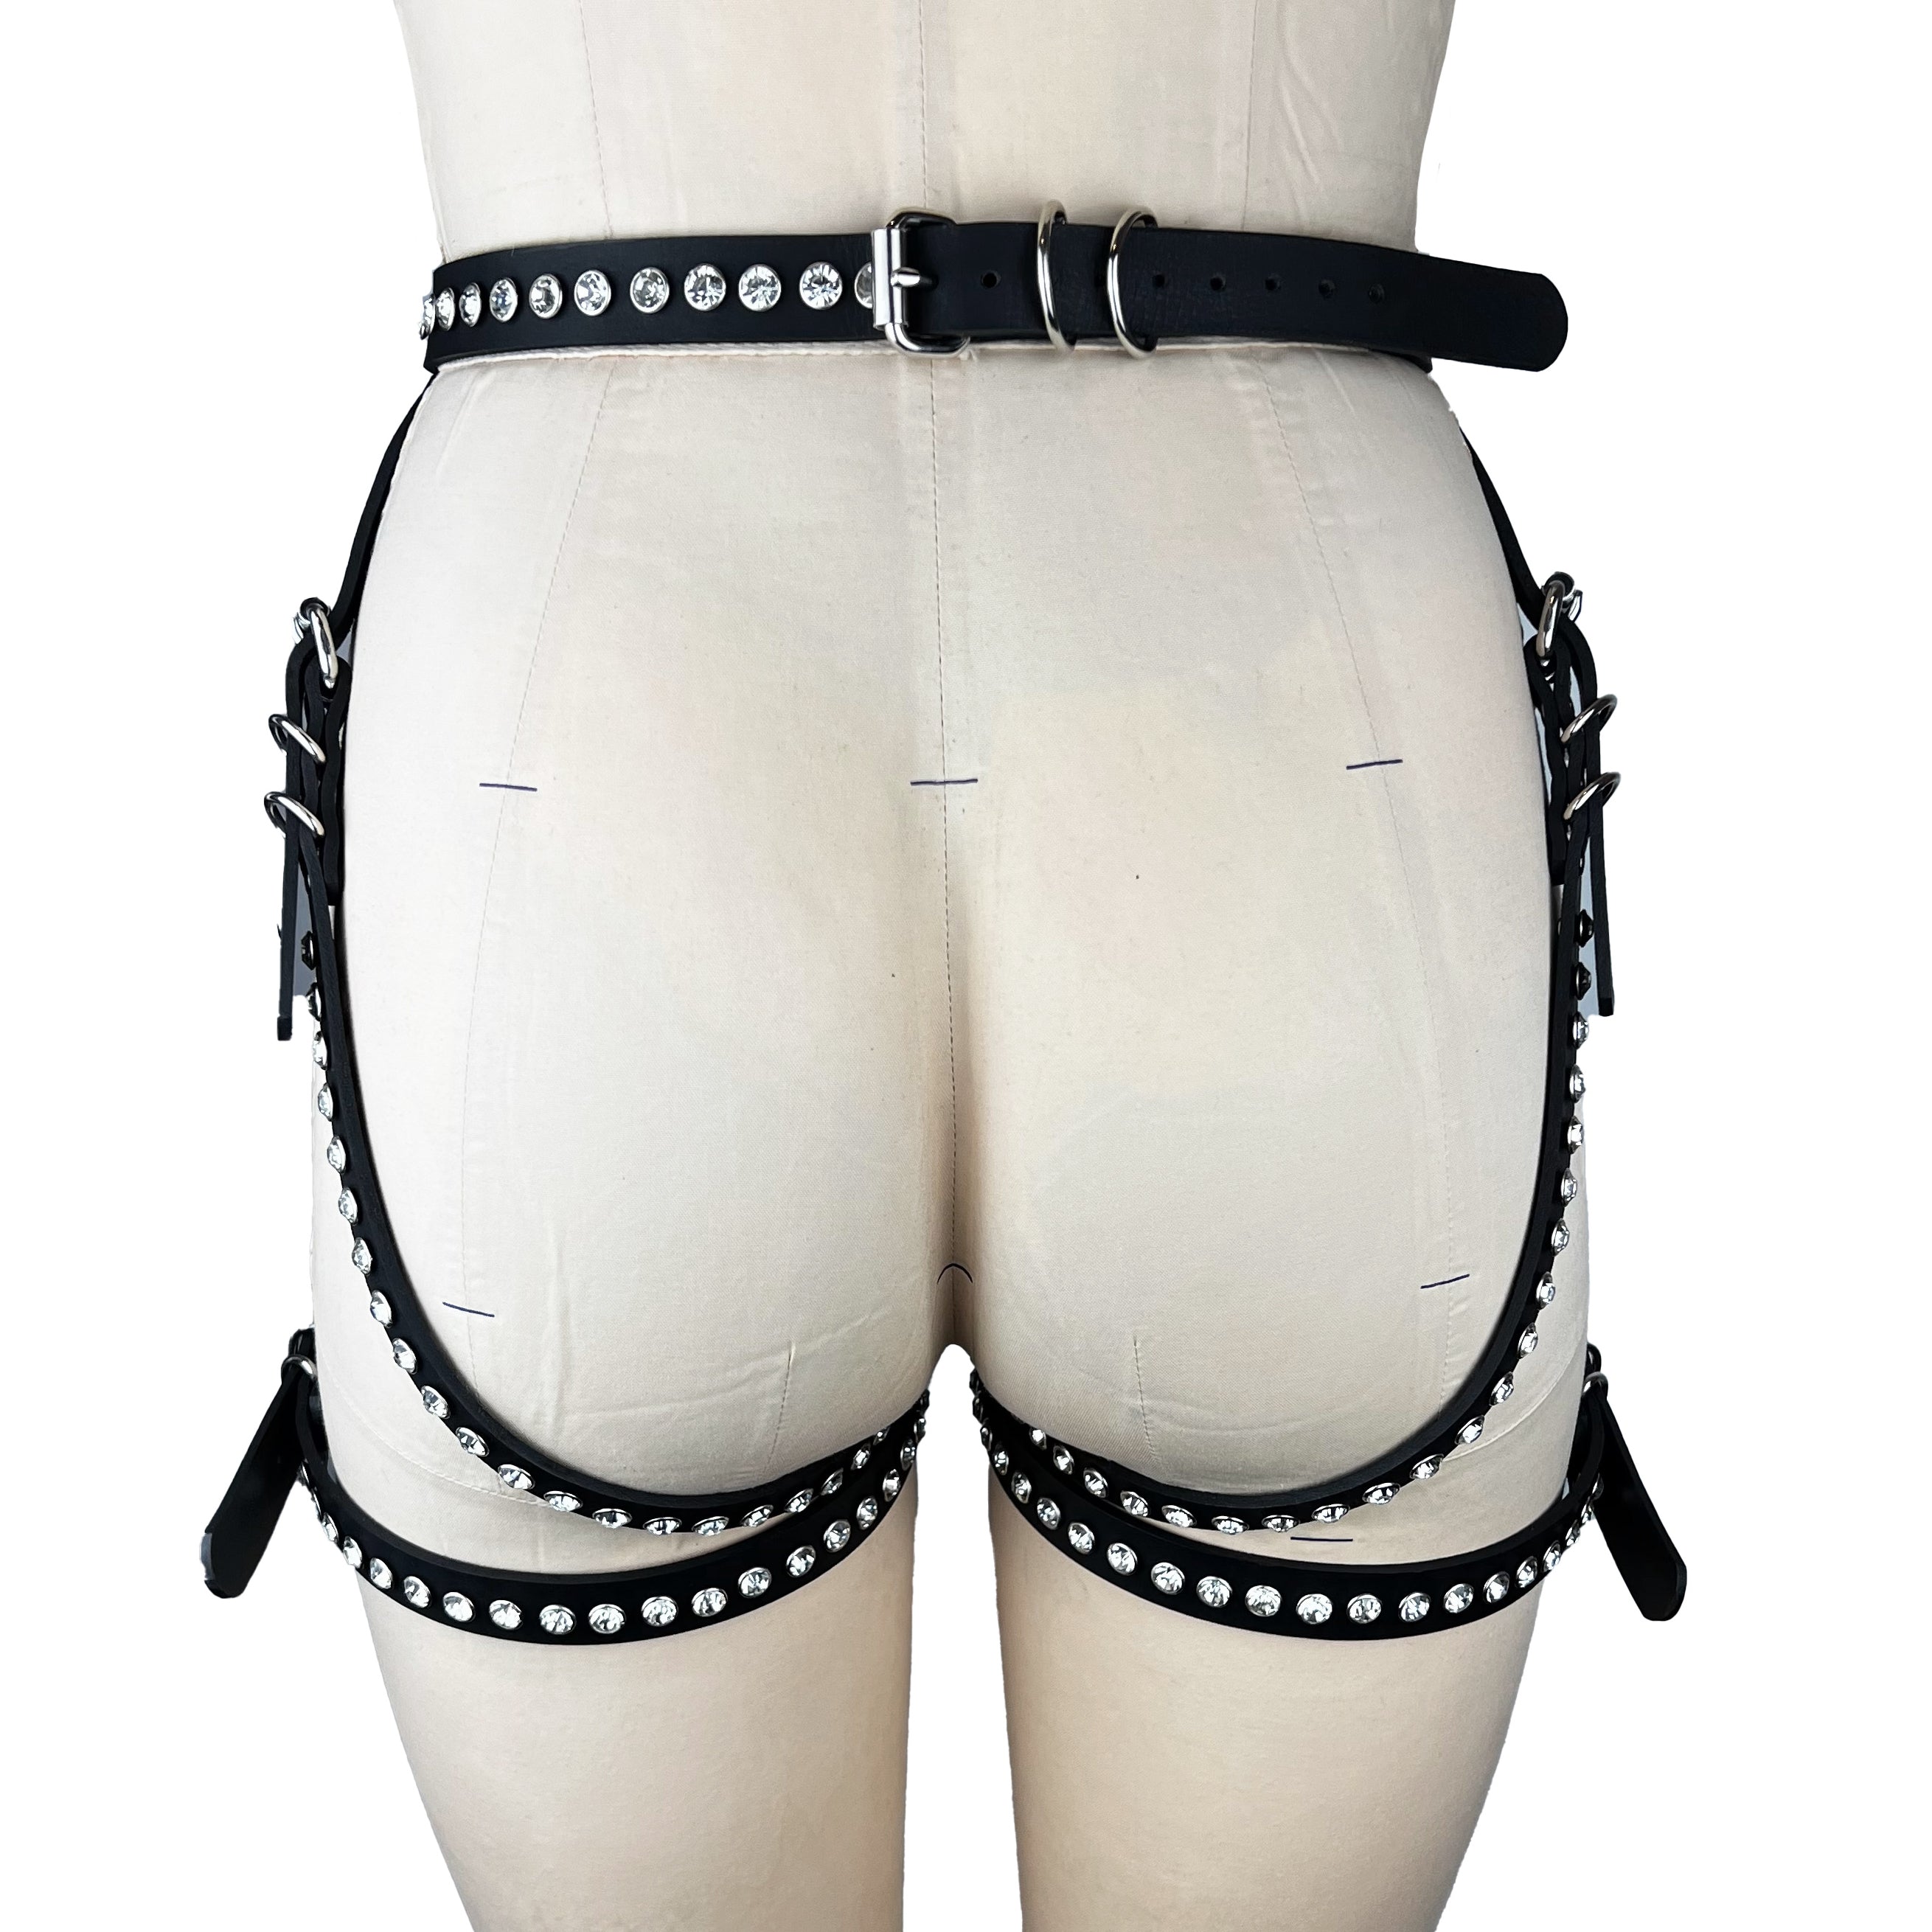 luxury Italian leather and crystal fashion and fetish women's men's booty harness, bespoke, made-to-order in nyc, back view